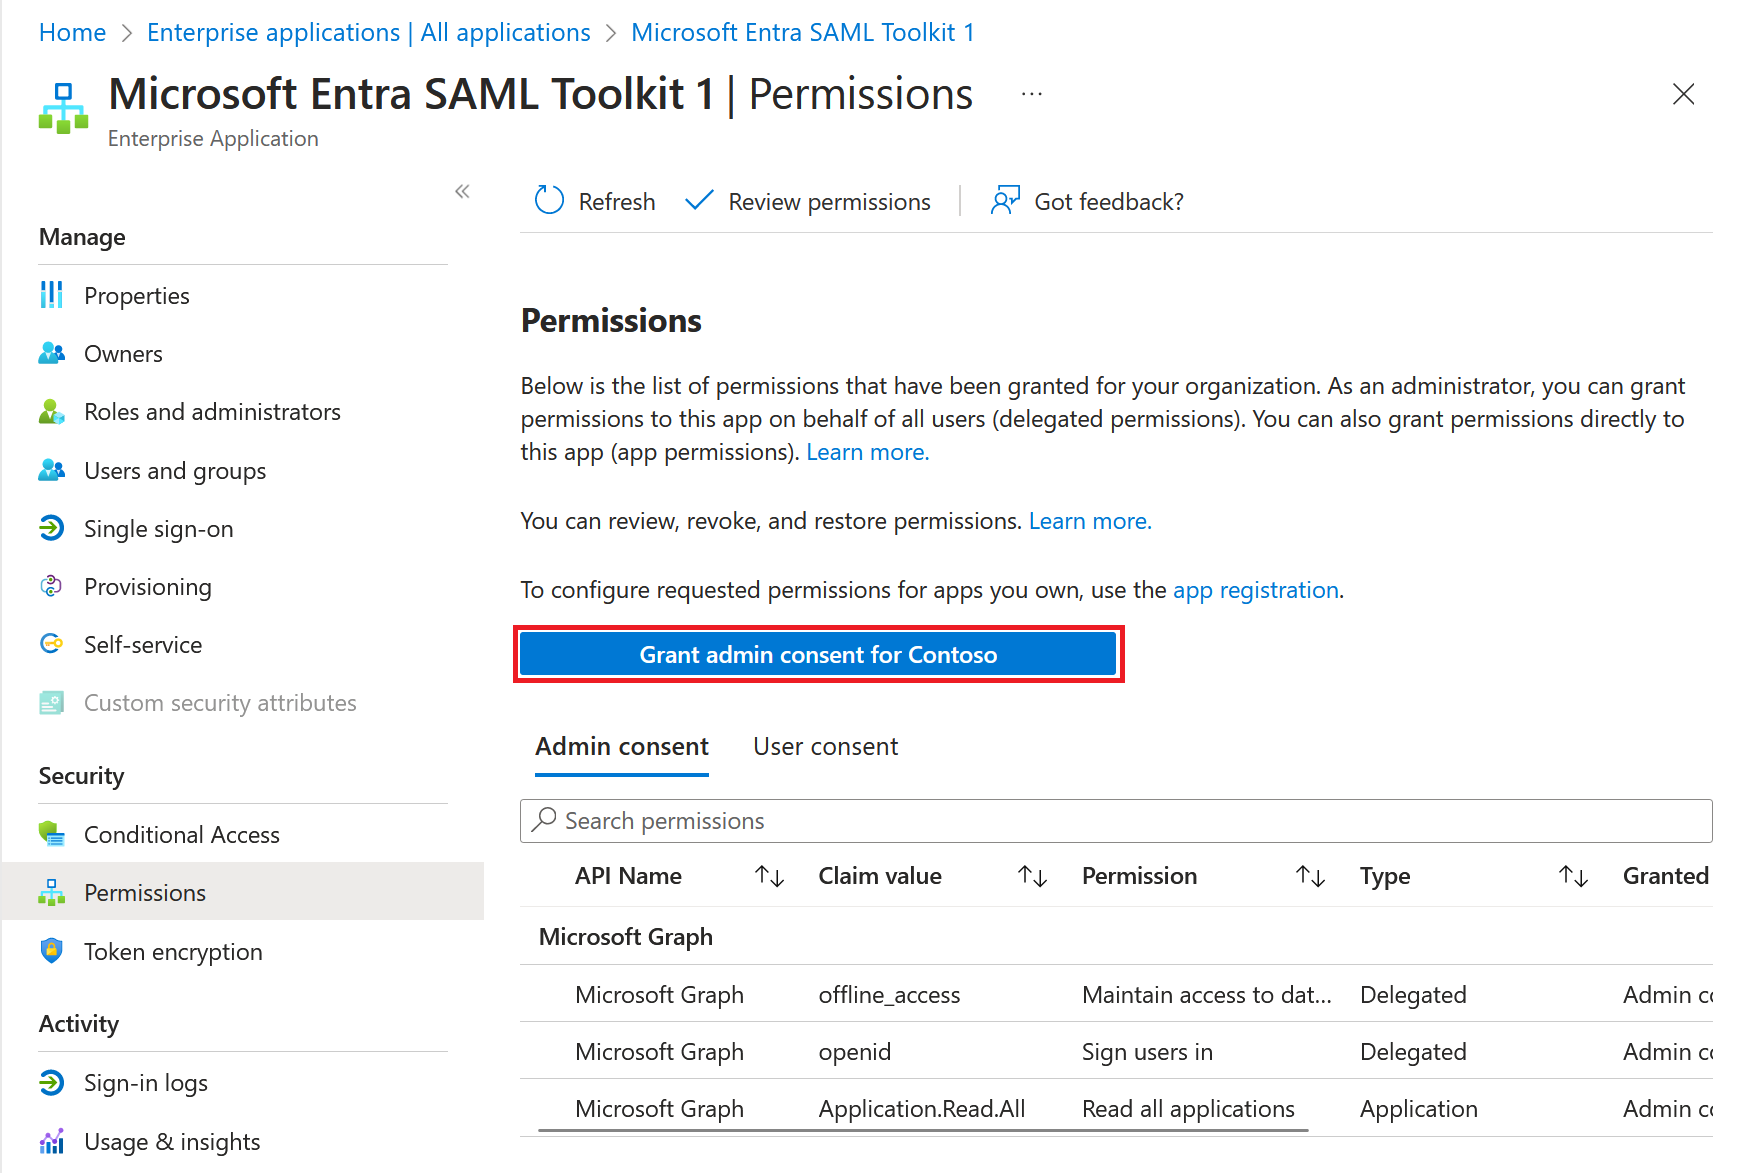 Screenshot shows how to grant tenant-wide admin consent.